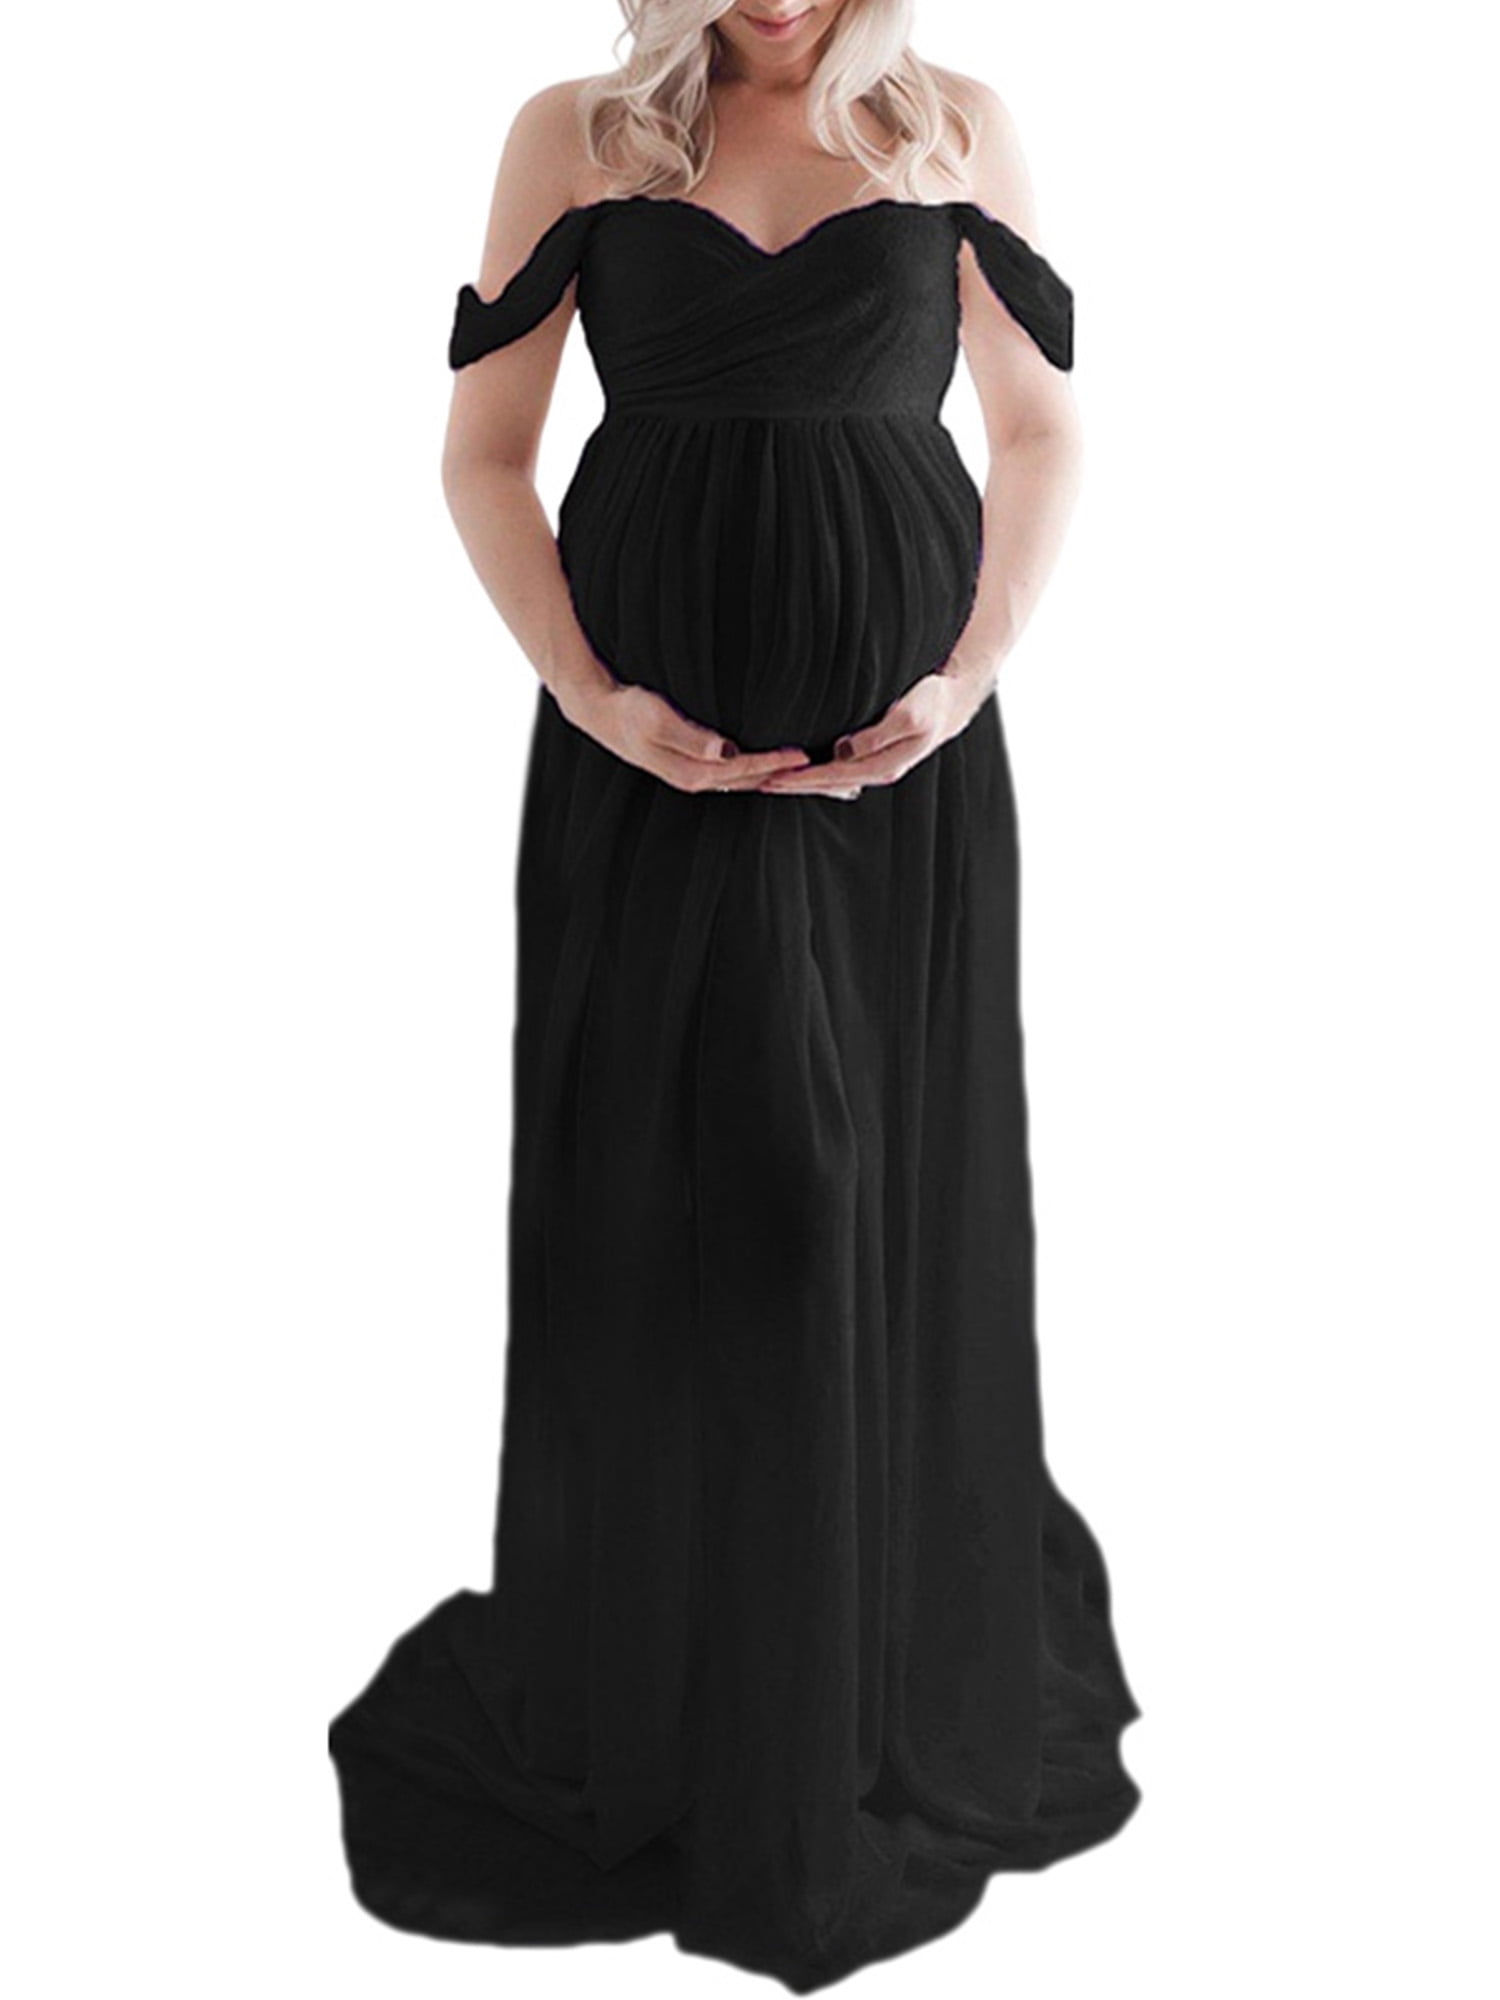 ACSUSS Maternity Dress for Photography Off Shoulder Chiffon Split Gown Maternity Dress for Photoshoot Baby Shower 